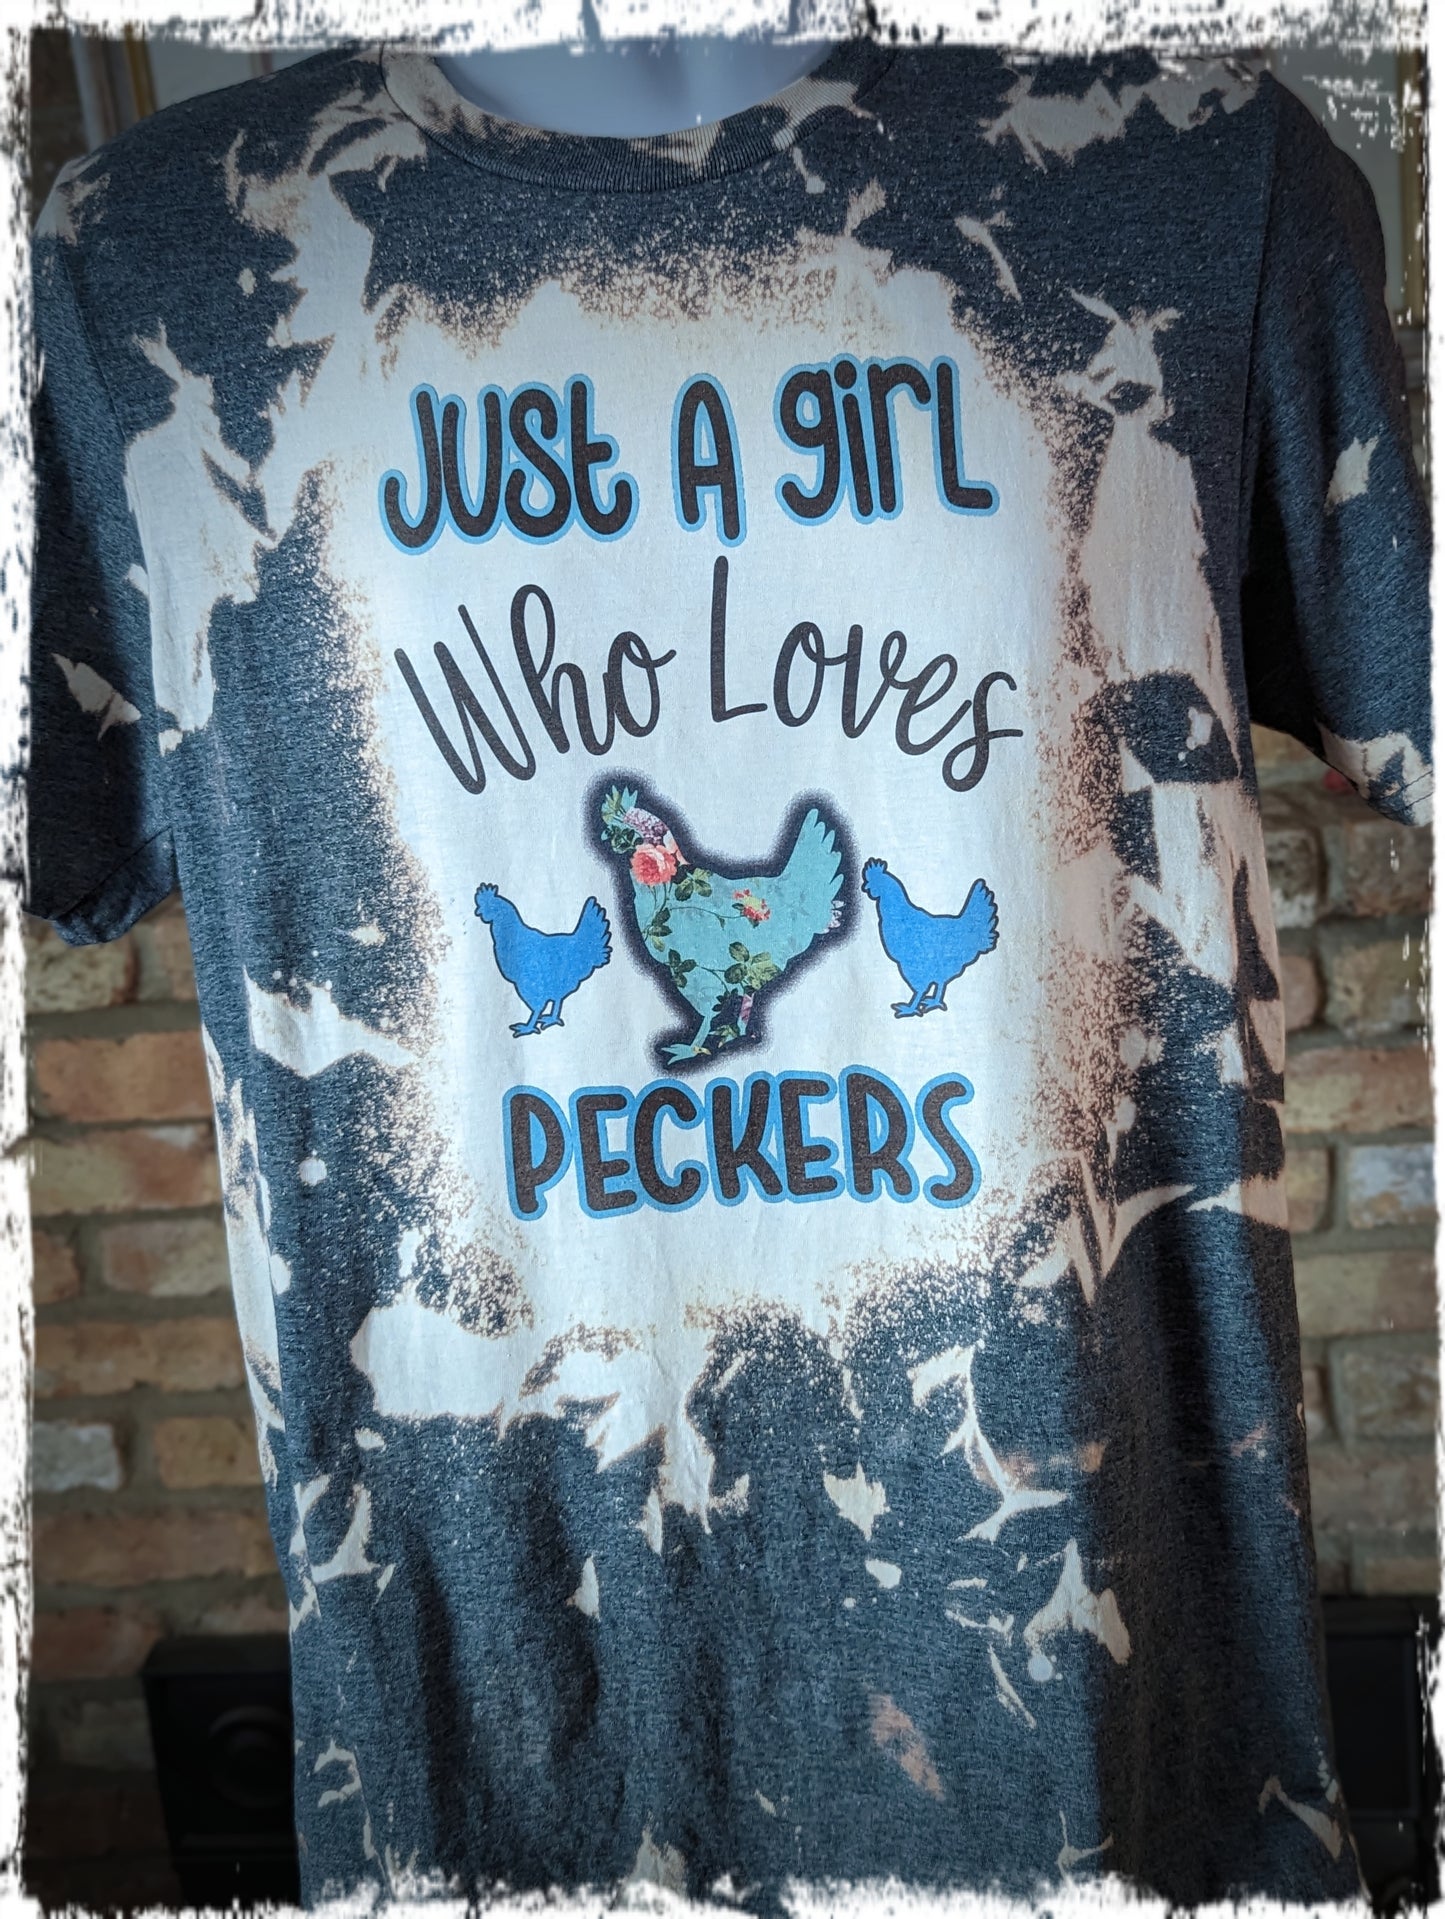 Just a Girl who likes Peckers